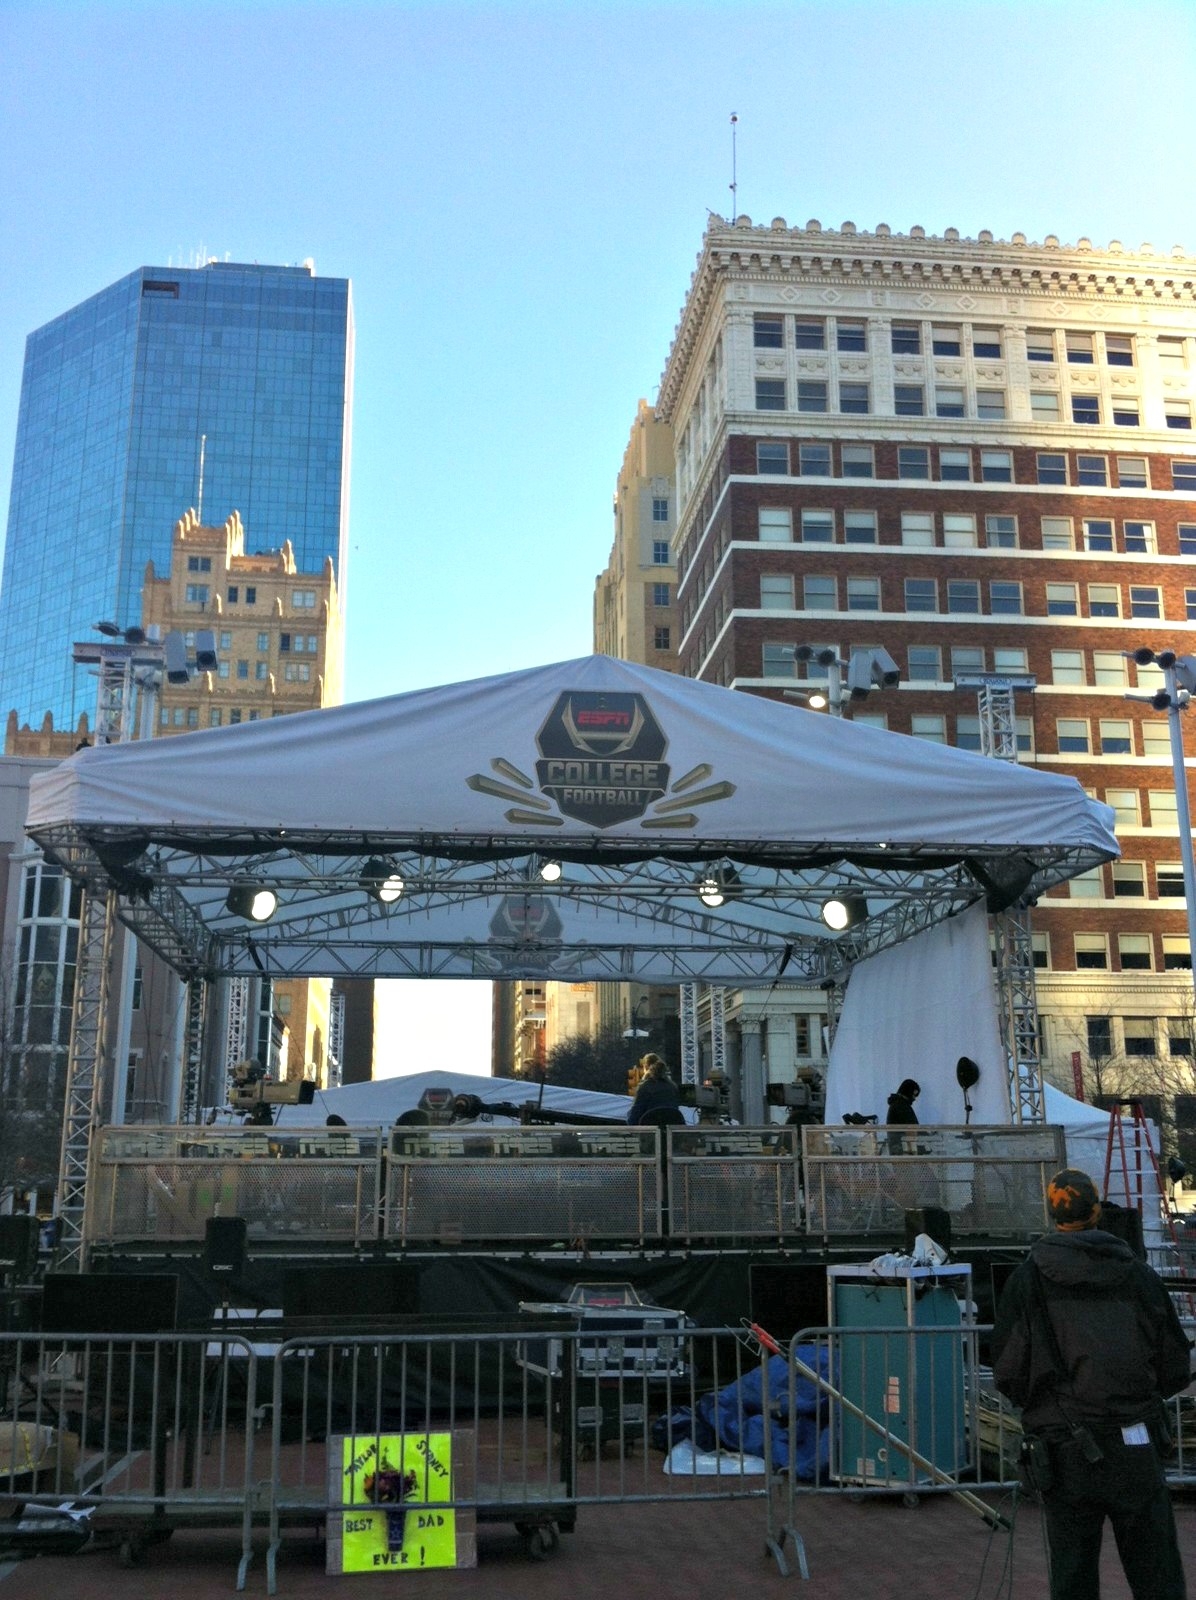 ESPN crew members work on setting up the sets in Sundance Square, Fort Worth, Texas. (Justine DeLuco/ESPN)